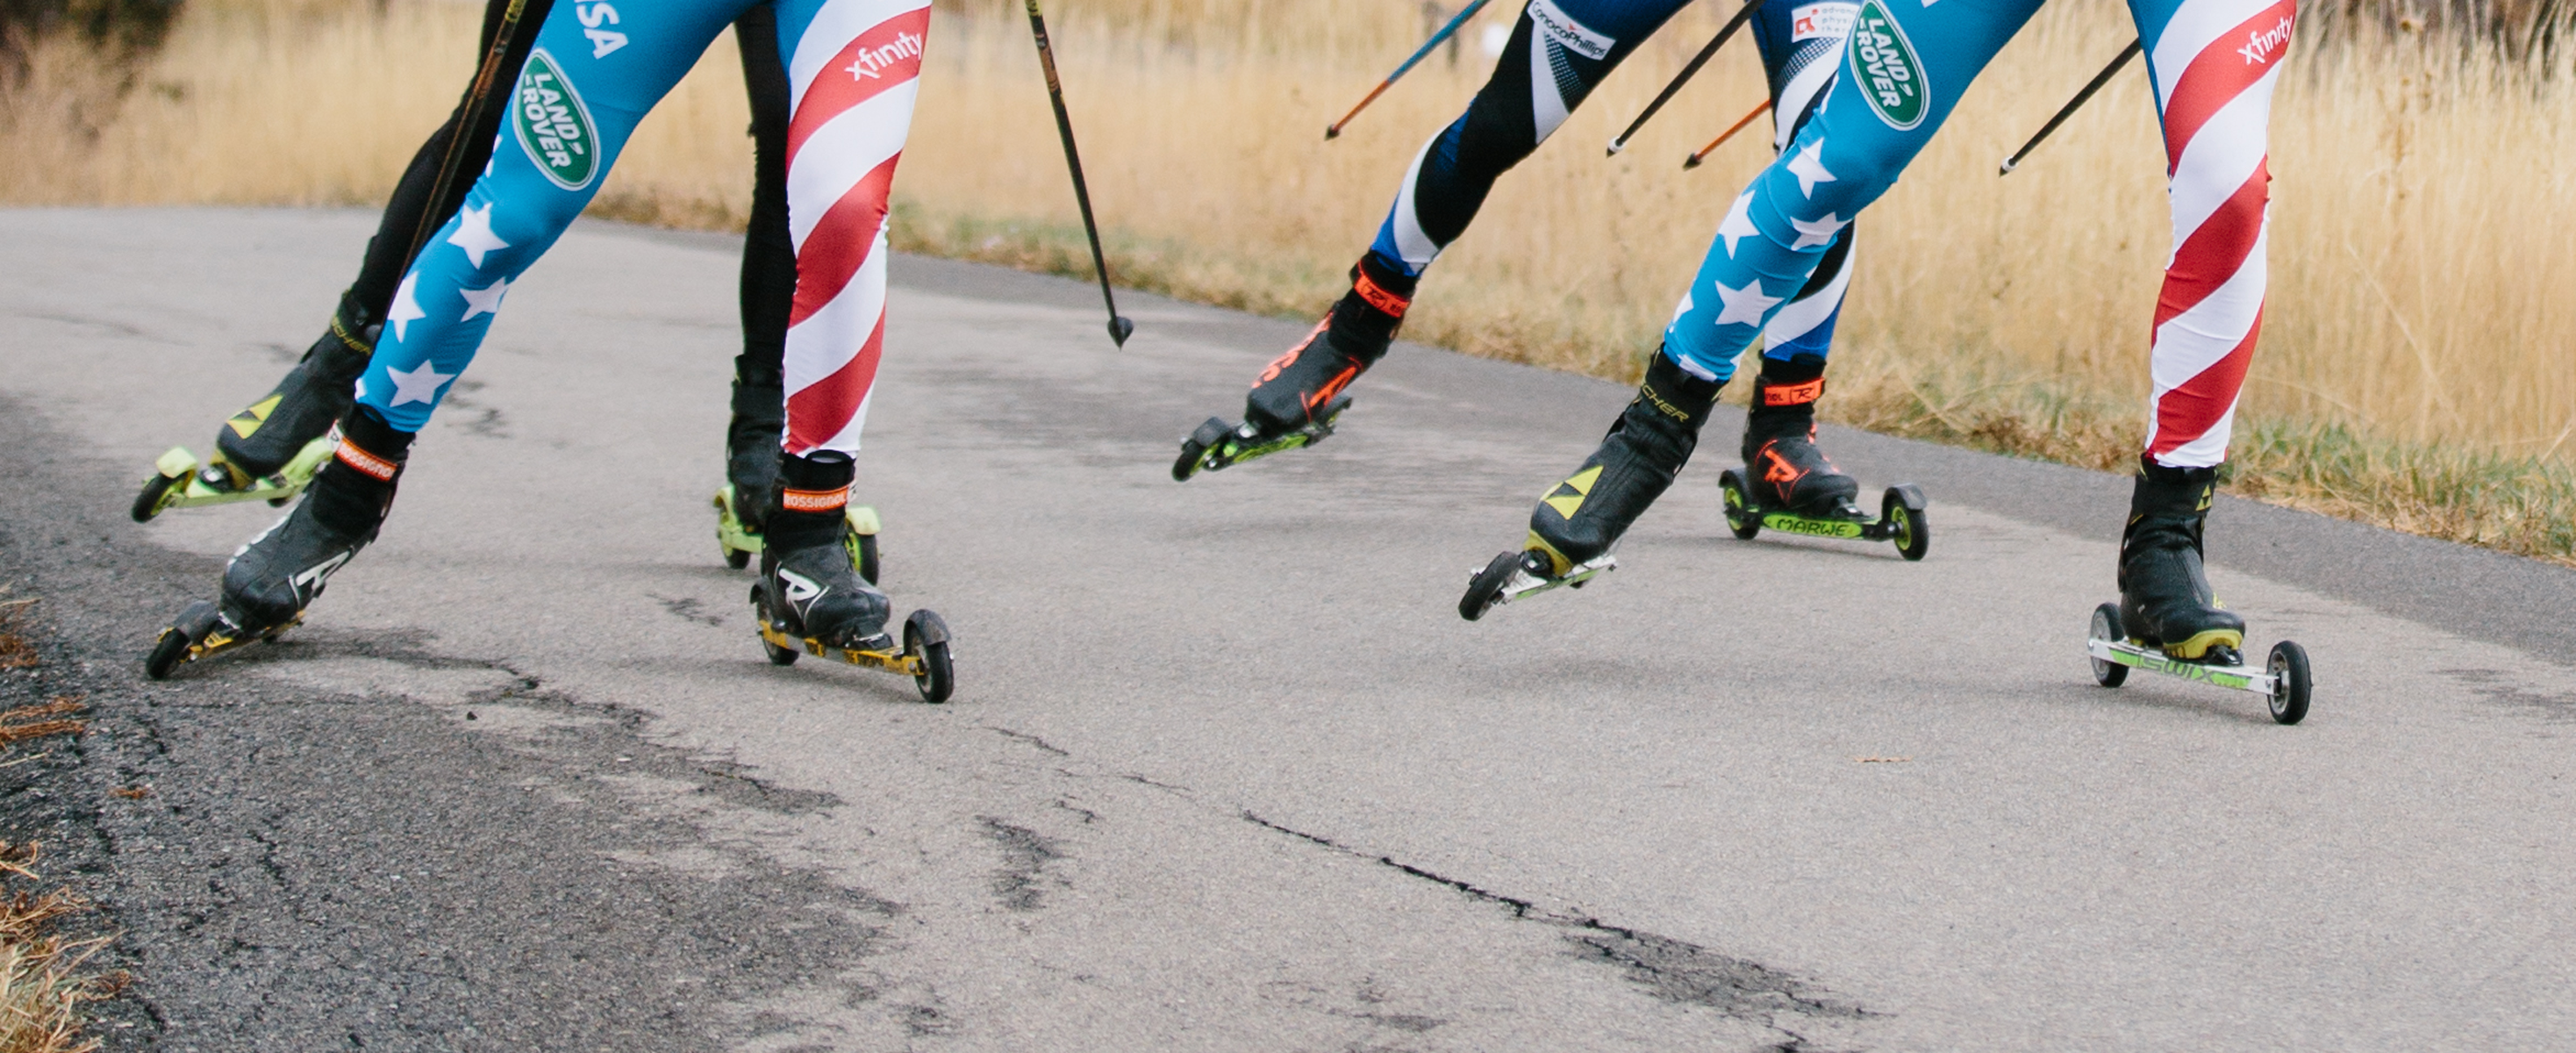 USST Rollerskiing at Soldier Hollow in Oct 2019